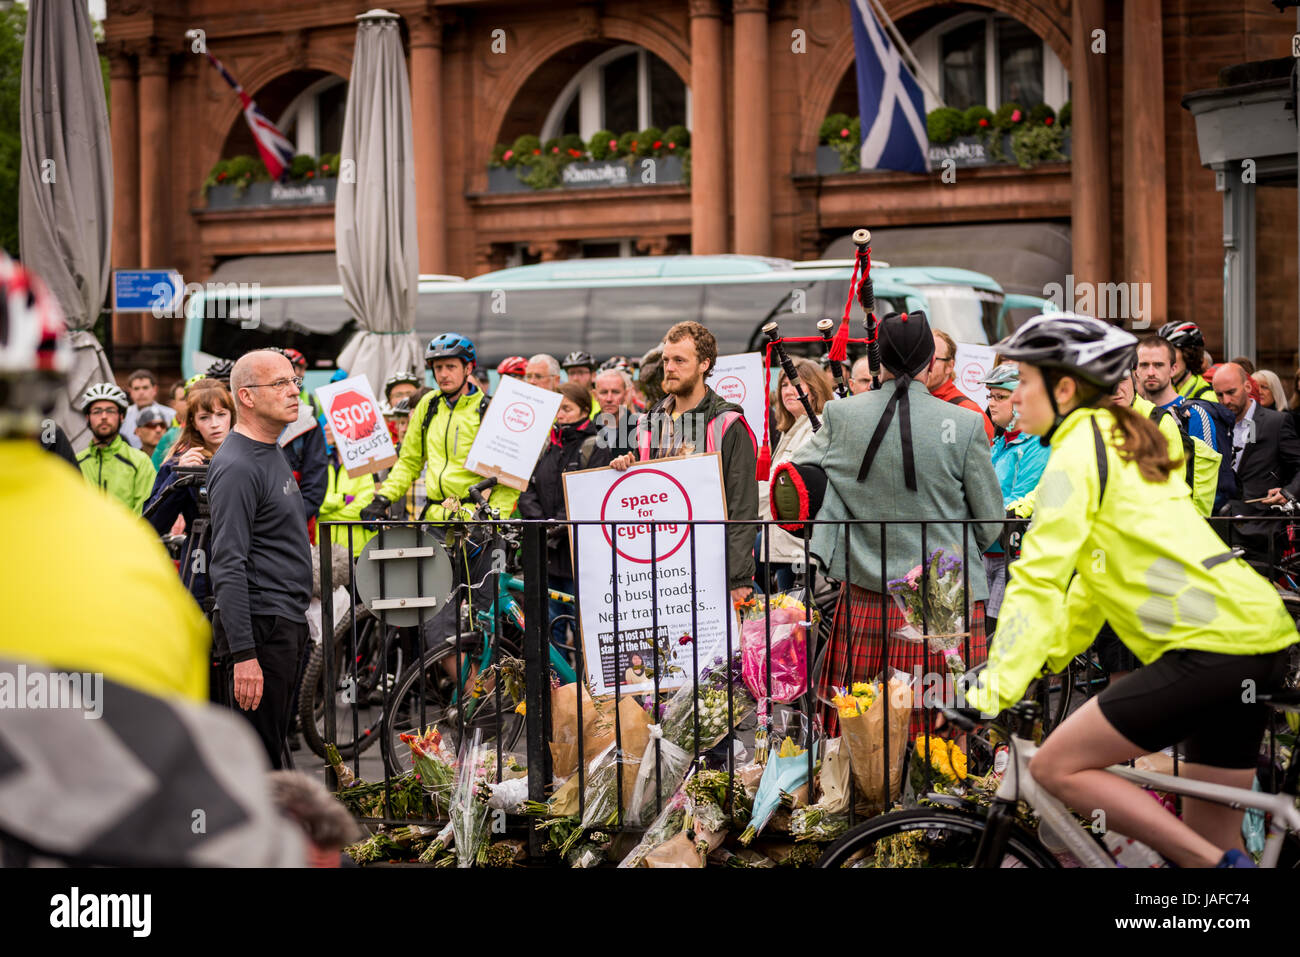 Edinburgh, UK. 7th Jun, 2017. Cyclists gathered at 8.30am on Wed 7 June 2017 in Edinburgh, Scotland, to commemorate medical student Zhi Min Soh with one minute's silence and a piper’s lament. She died one week earlier when her bike wheel got caught in the tram tracks on on Shandwick Place, Edinburgh. Credit: Andy Catlin/Alamy Live News Stock Photo